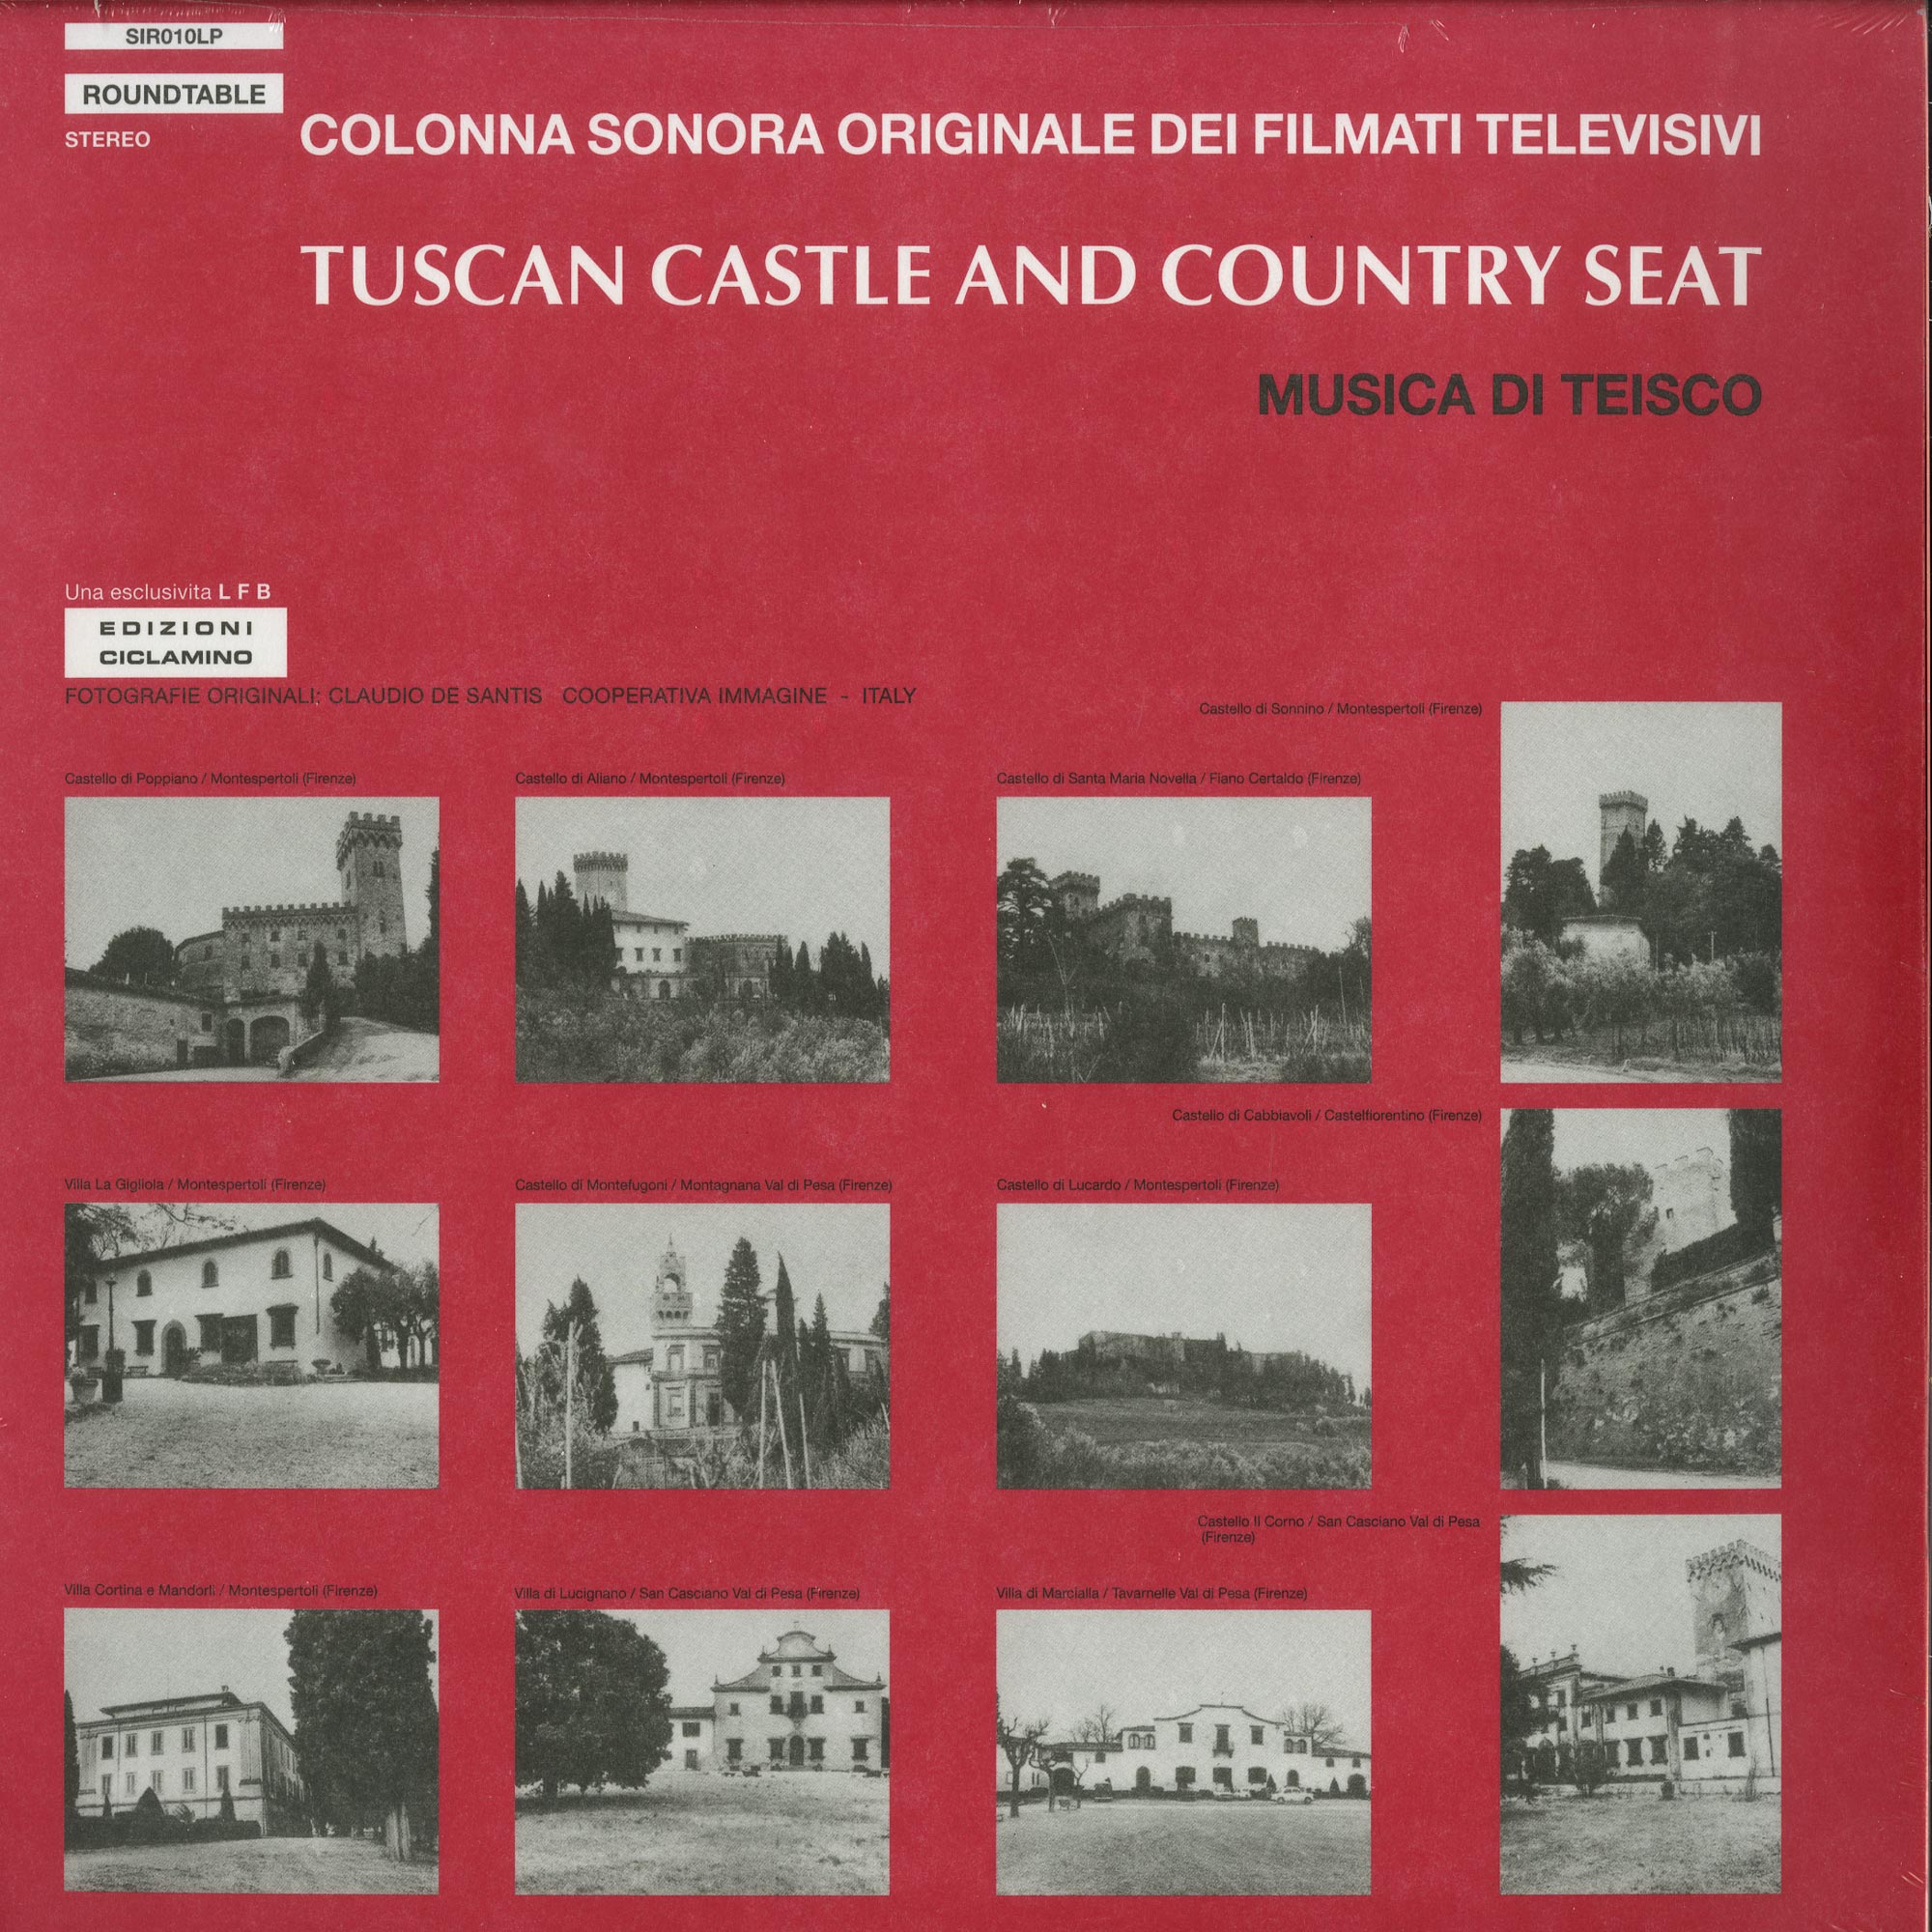 Teisco - TUSCAN CASTLE AND COUNTRY SEAT 